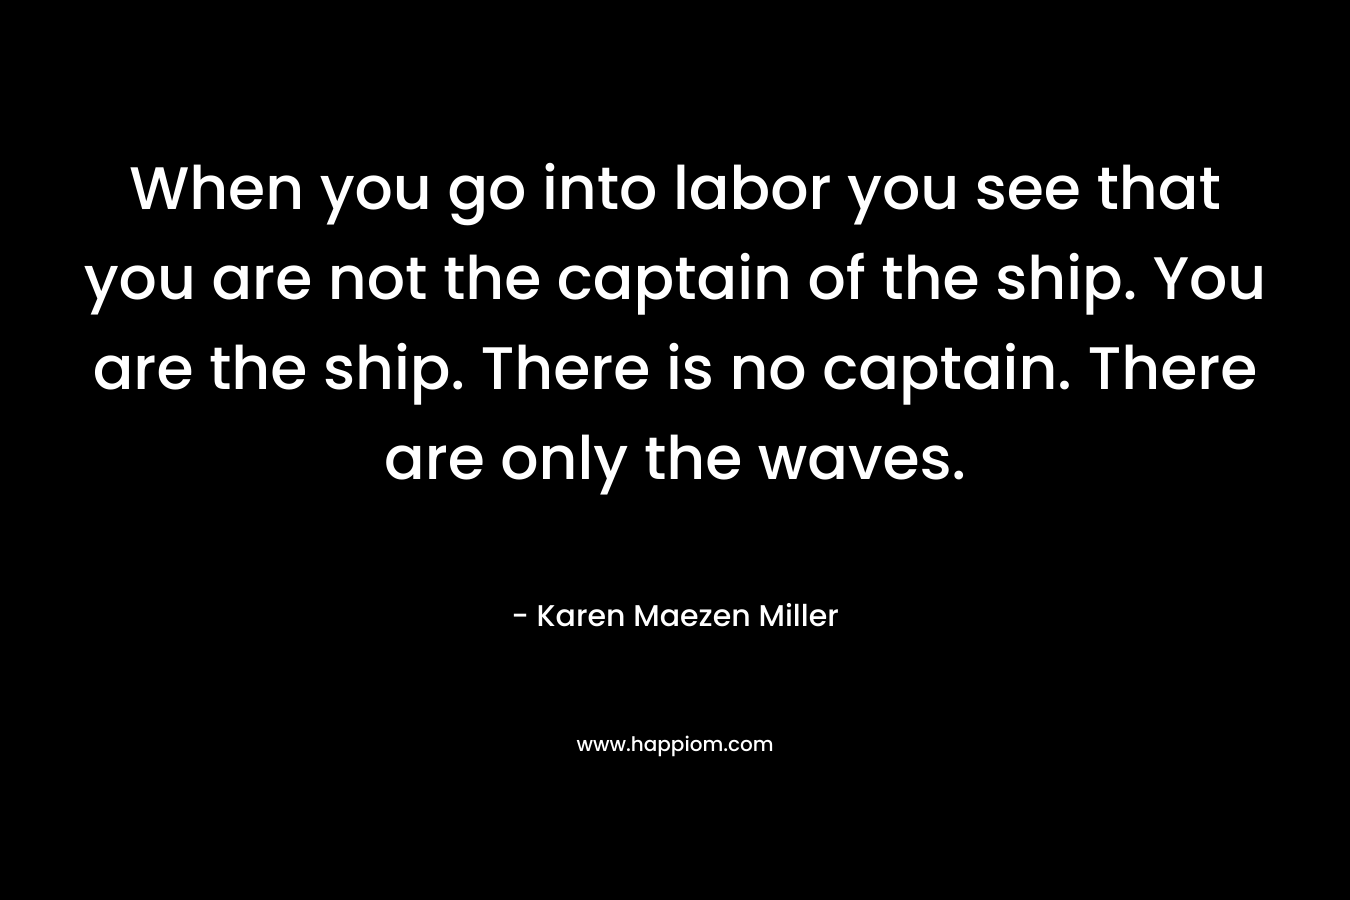 When you go into labor you see that you are not the captain of the ship. You are the ship. There is no captain. There are only the waves. – Karen Maezen Miller